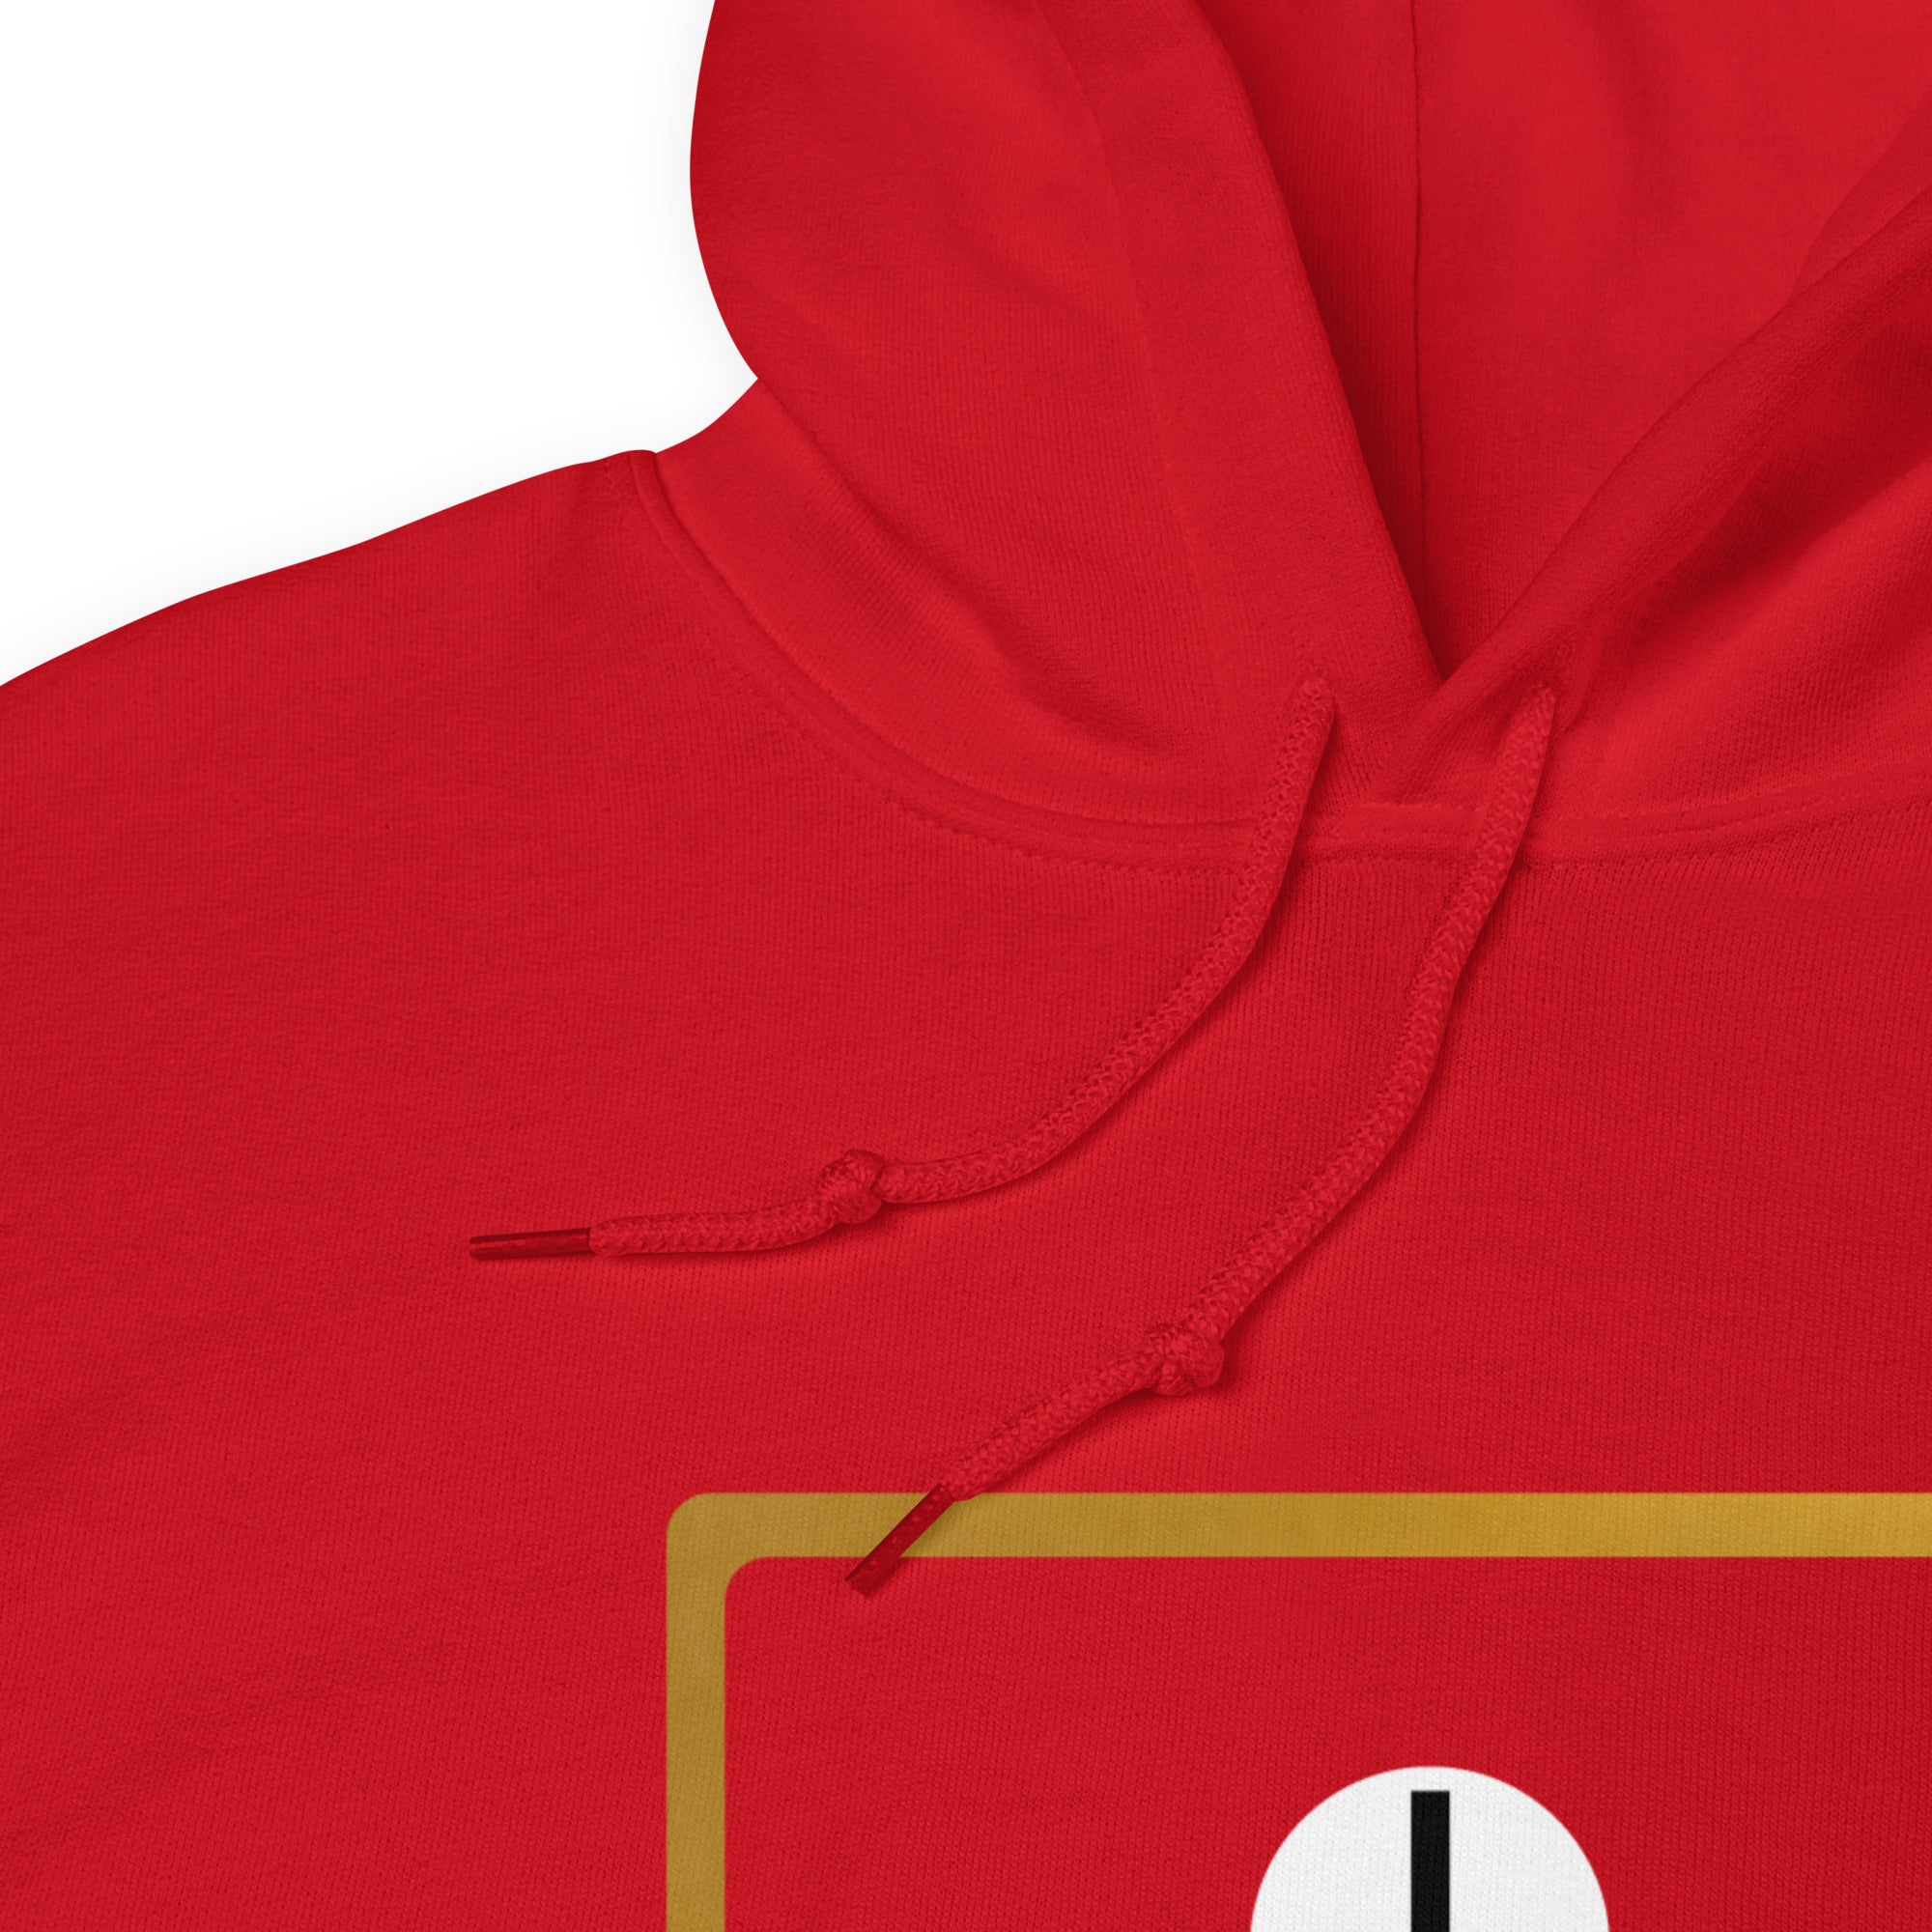 1: Hill Team Lotus 49B f1 world champion red hoodie front detail